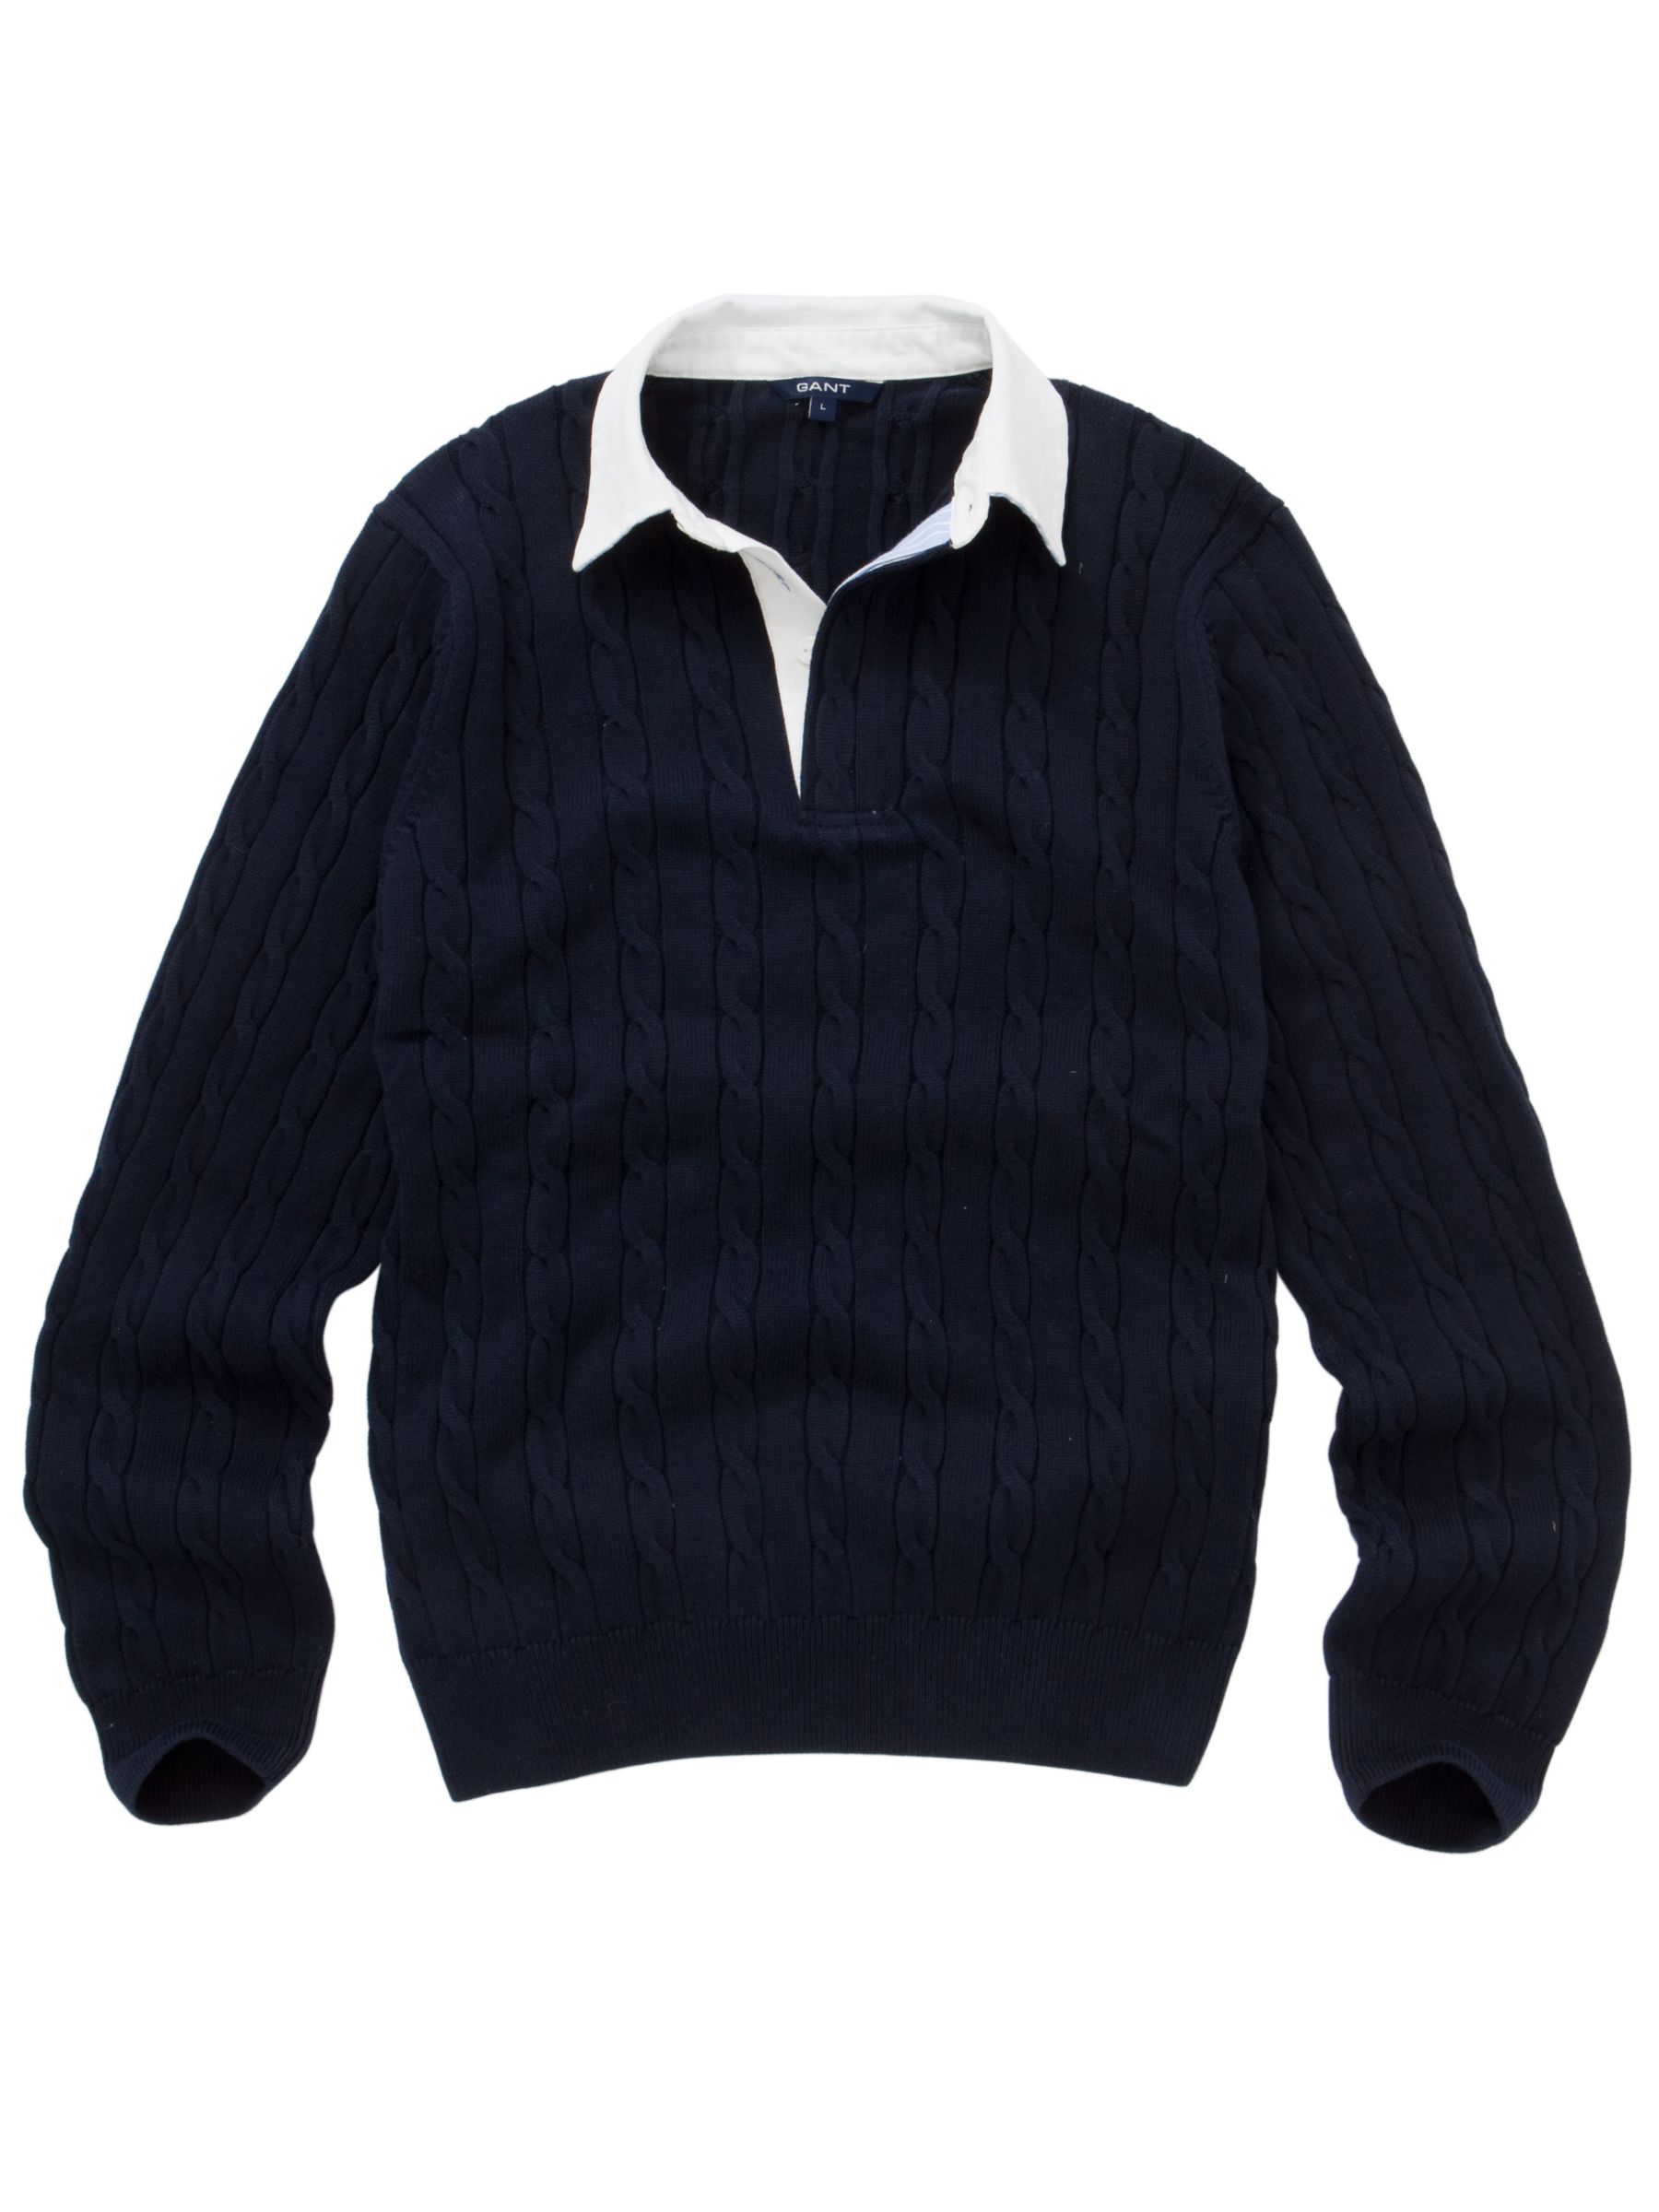 Gant Cable Knit Rugby Shirt, Blue